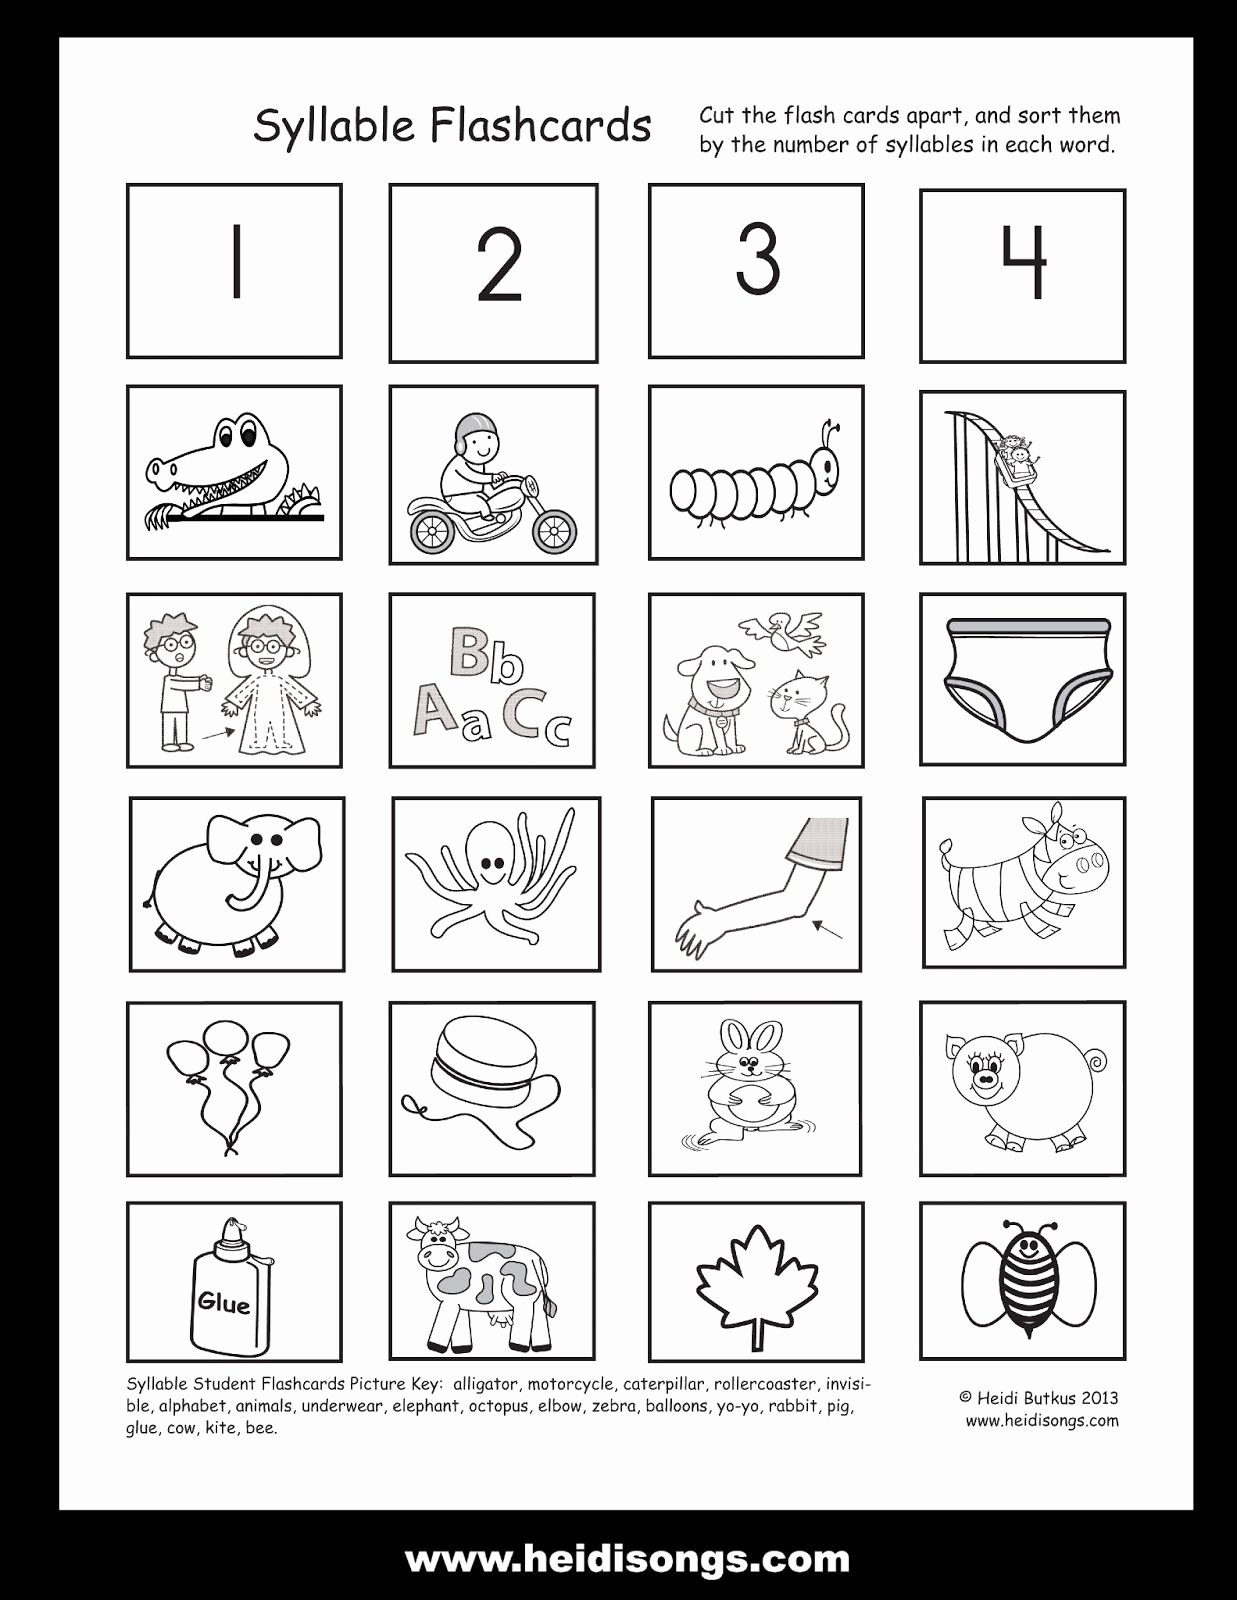 Syllables Worksheet for Kindergarten Beautiful Heidisongs Resource Small Syllable Flash Cards to Send